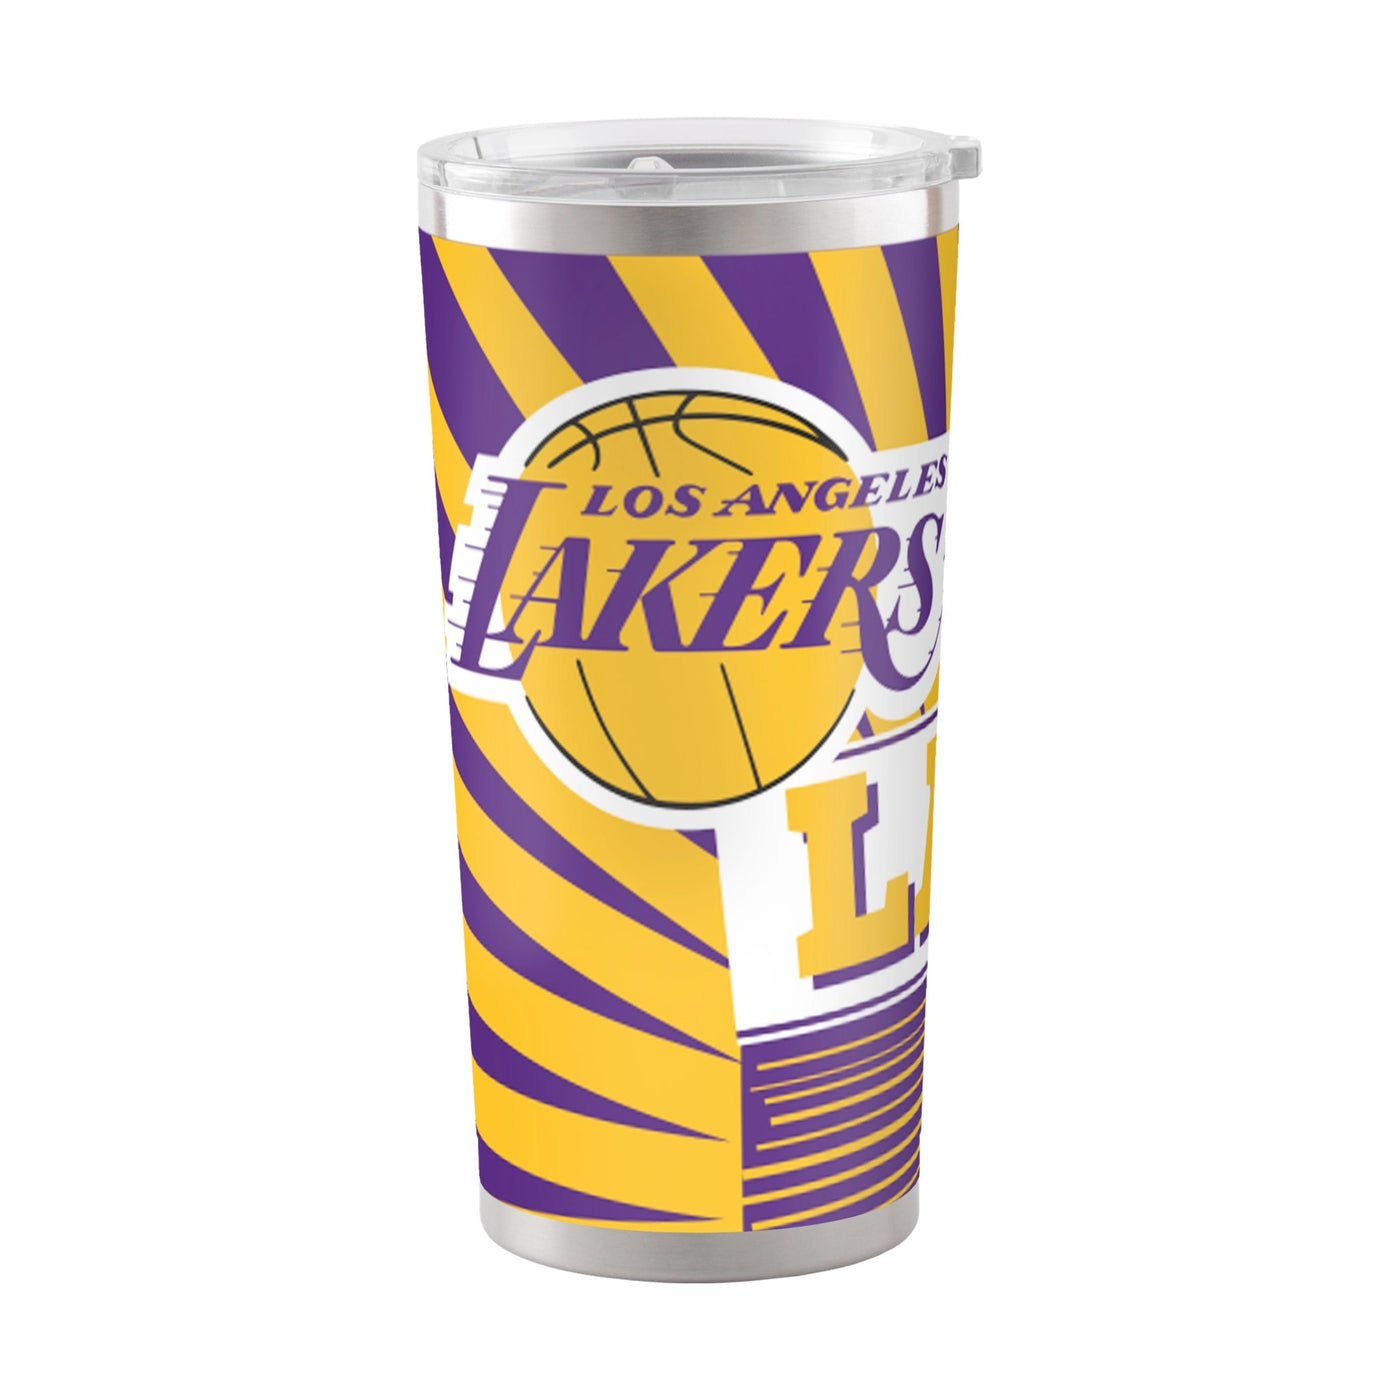 Los Angeles Lakers 20oz Mascot Stainless Steel Tumbler - Logo Brands